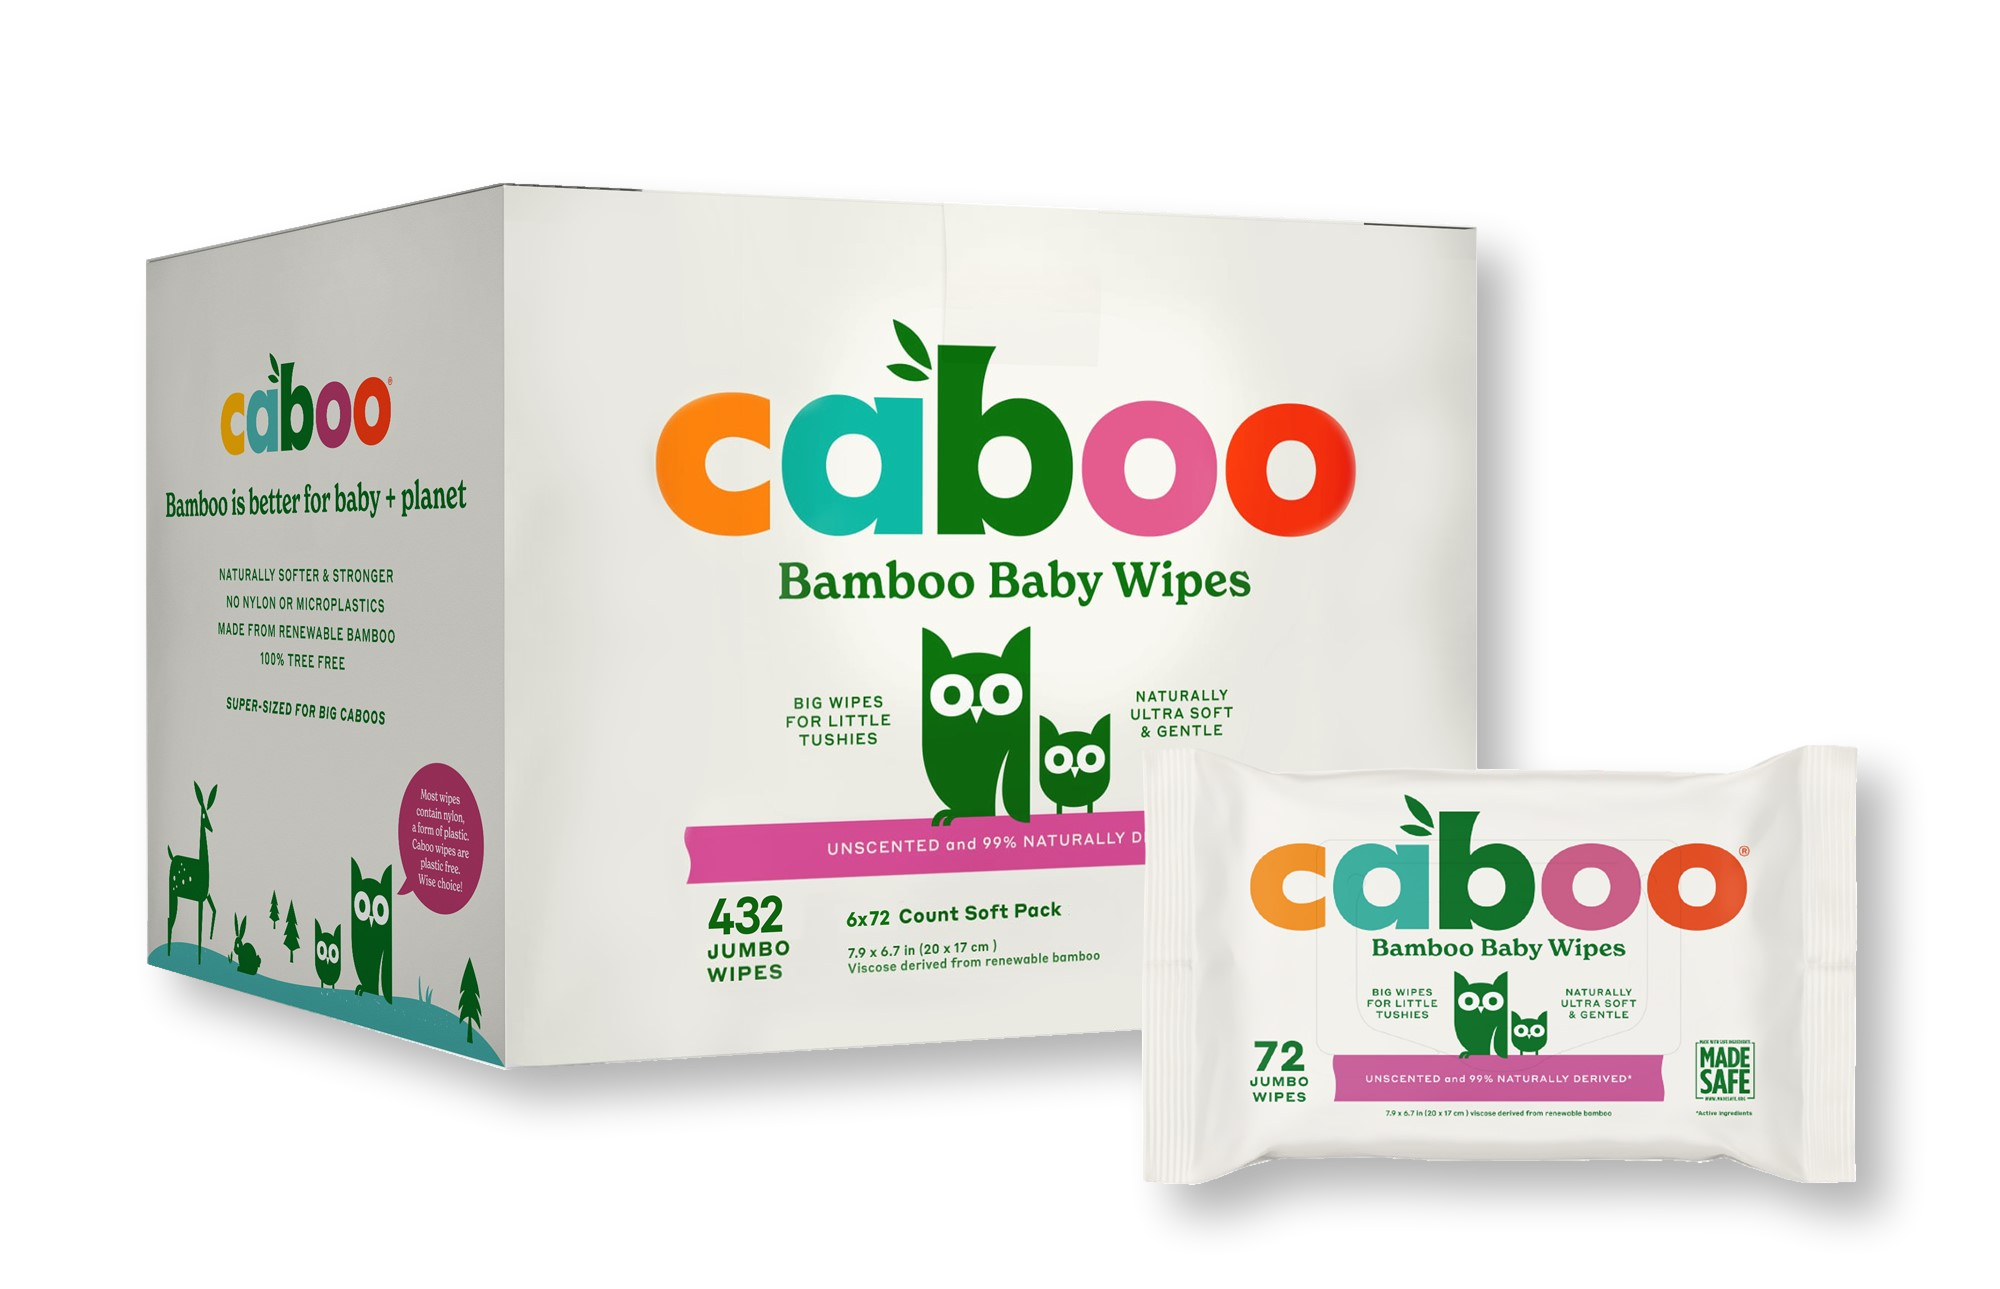 Caboo Tree-Free Baby Wipes (Bamboo Wipes)